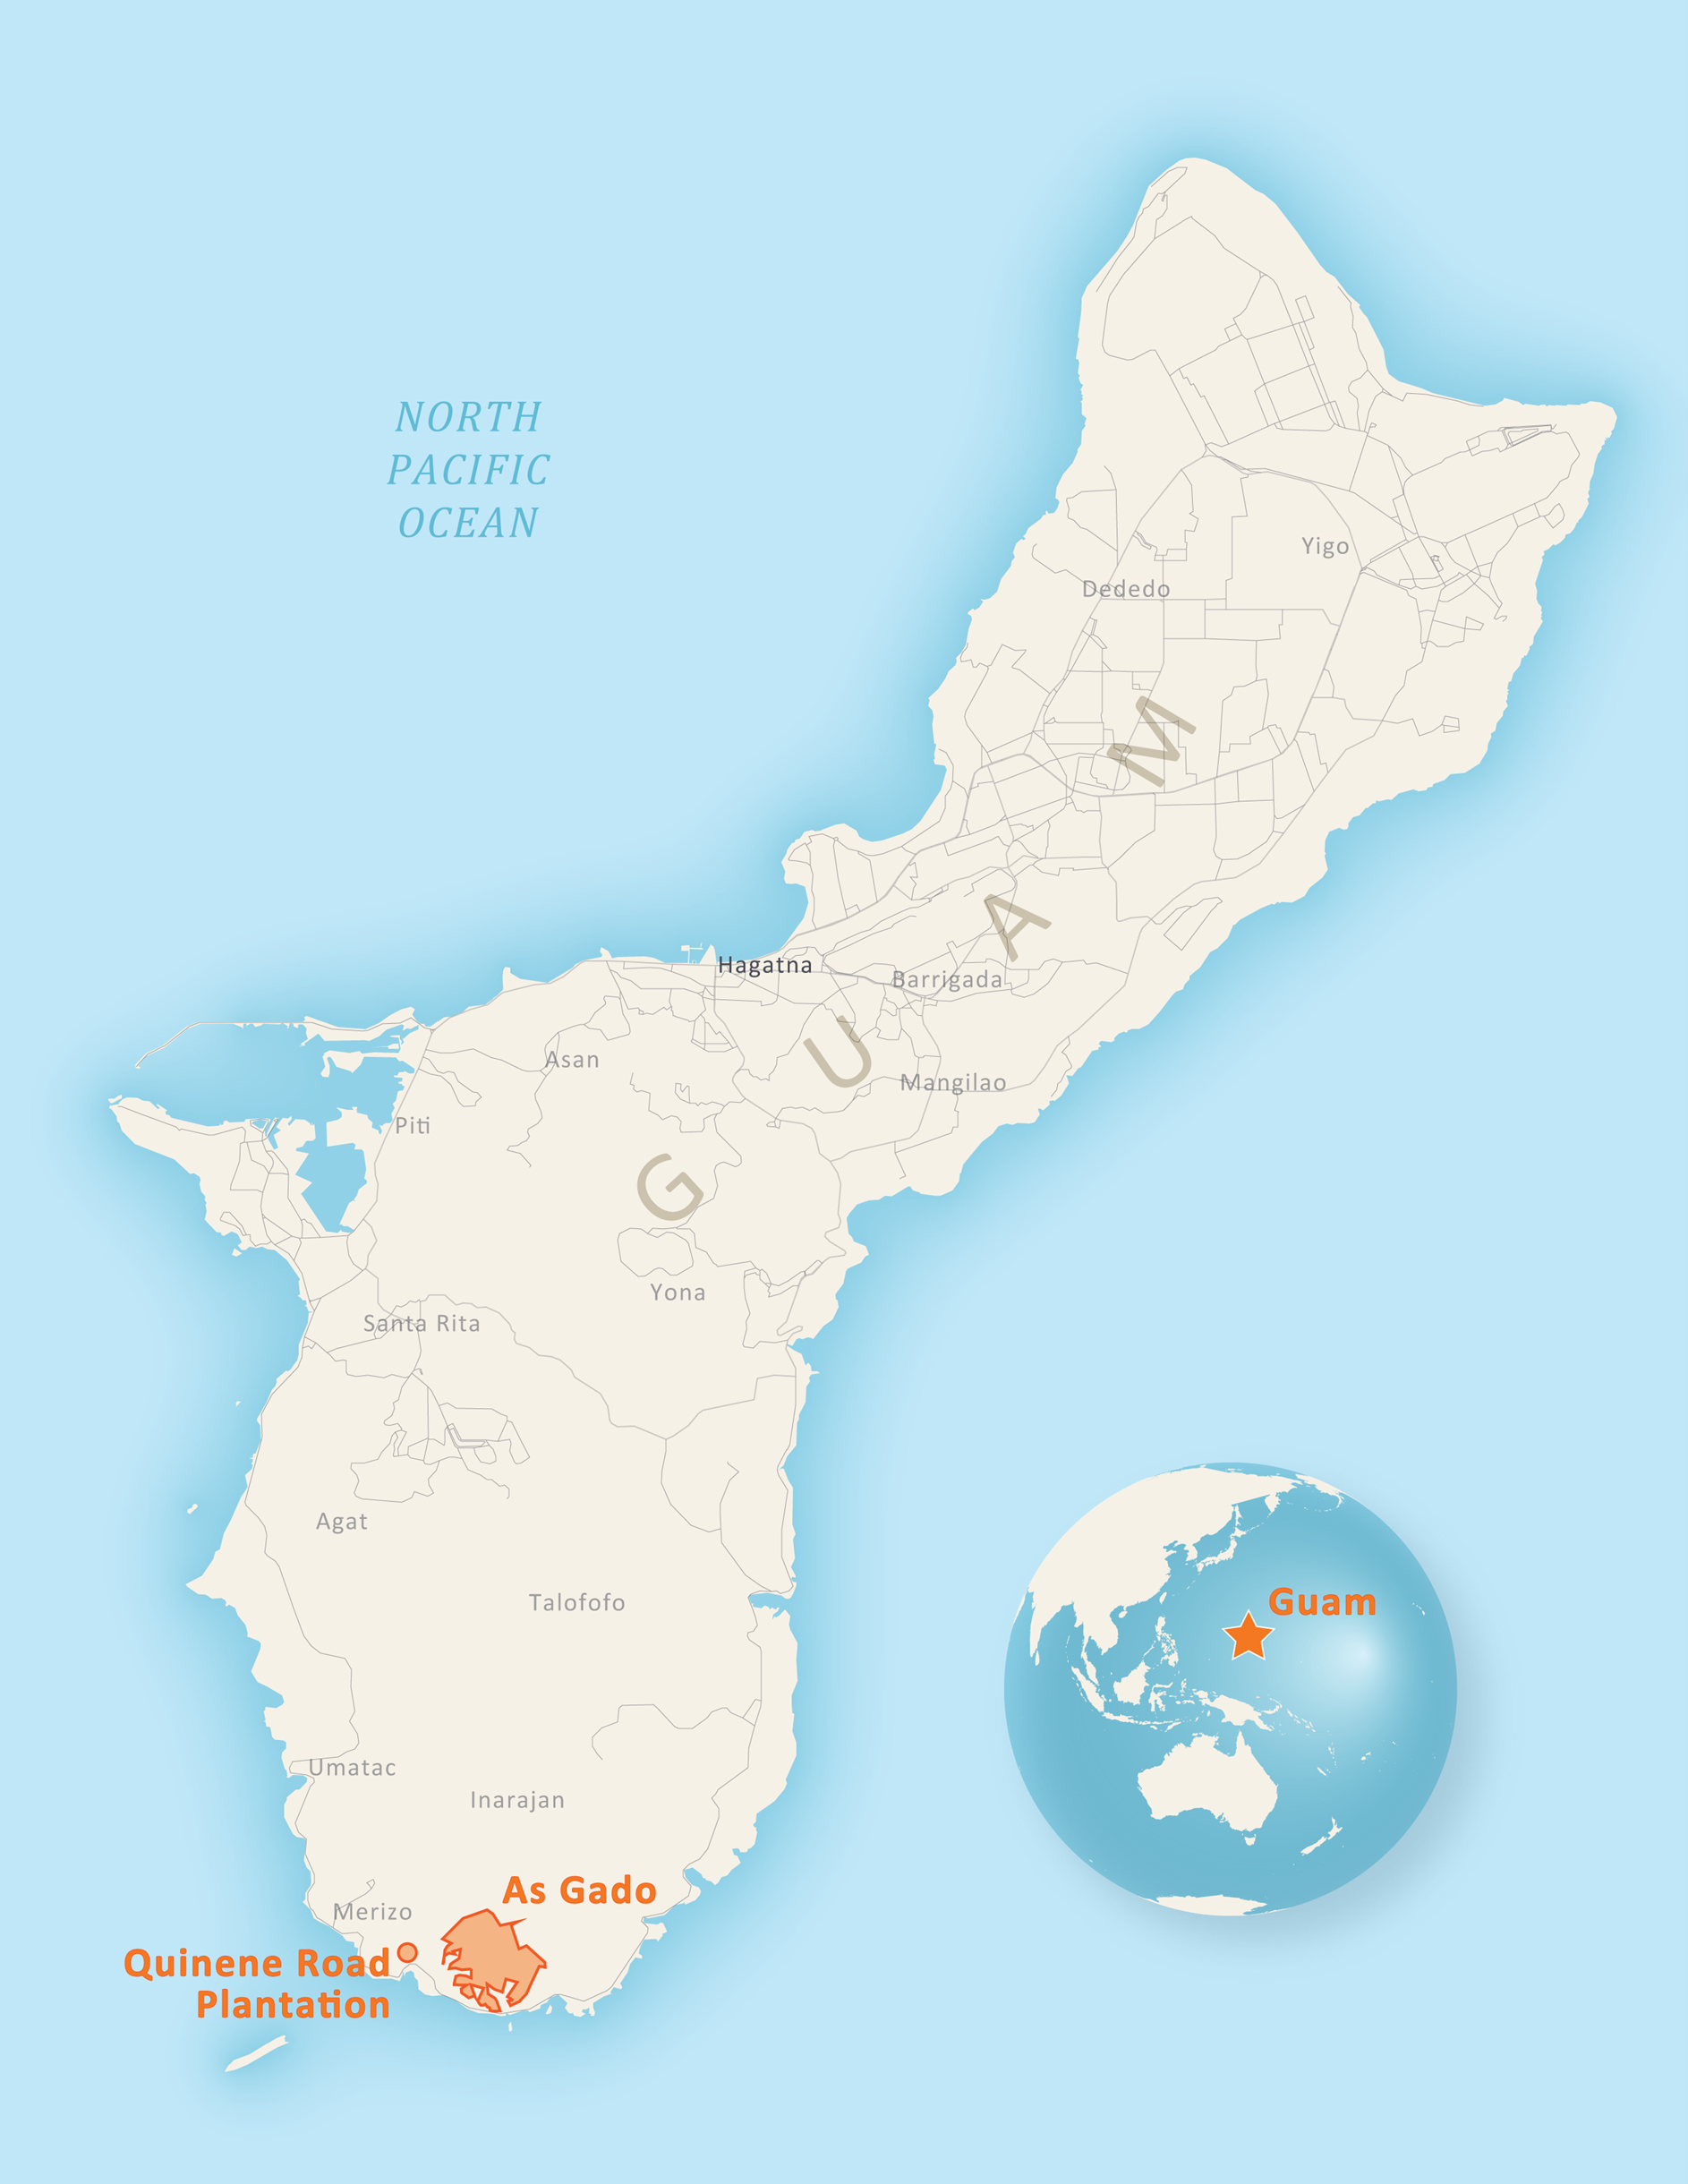 Map of Guam regions that projects need to be within to be eligible for funding